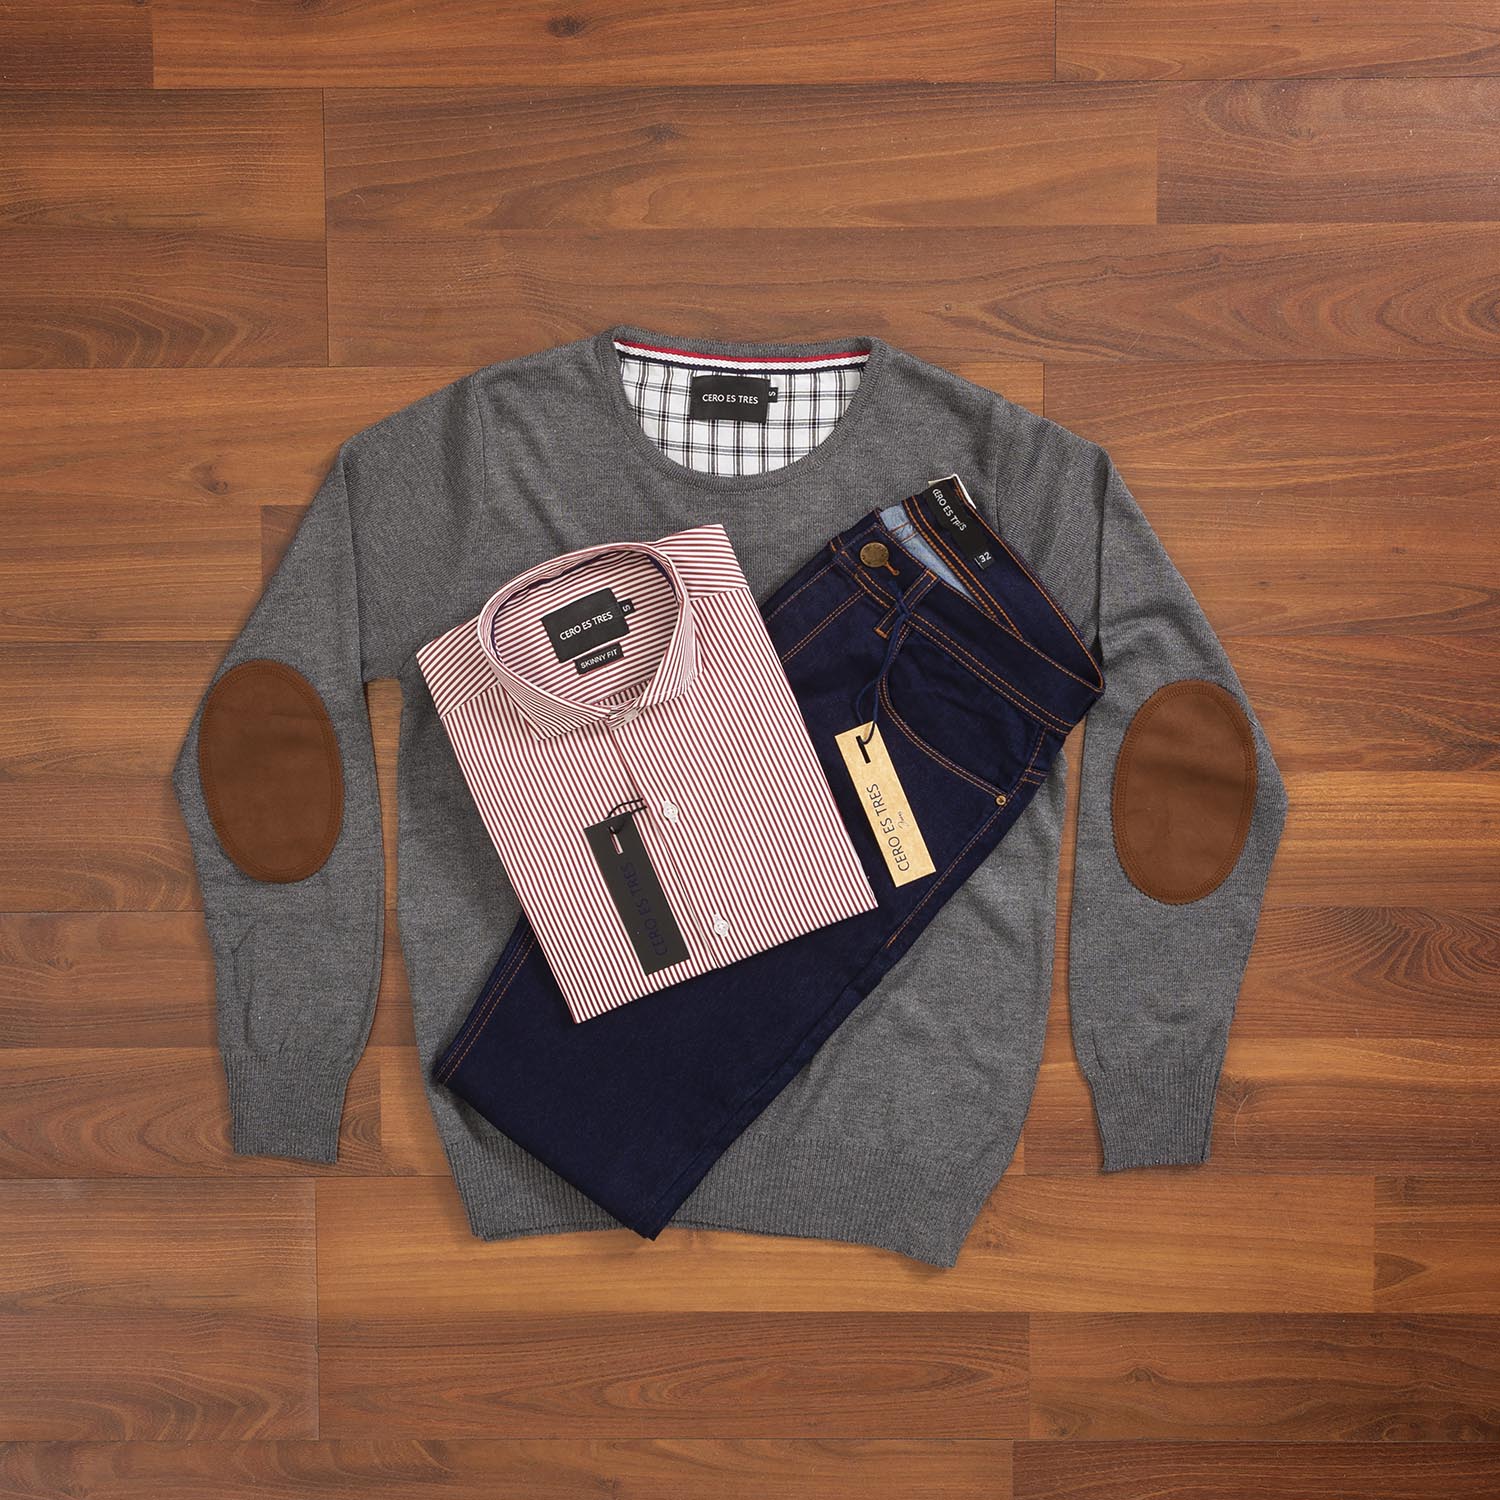 OUTFIT CERO 402